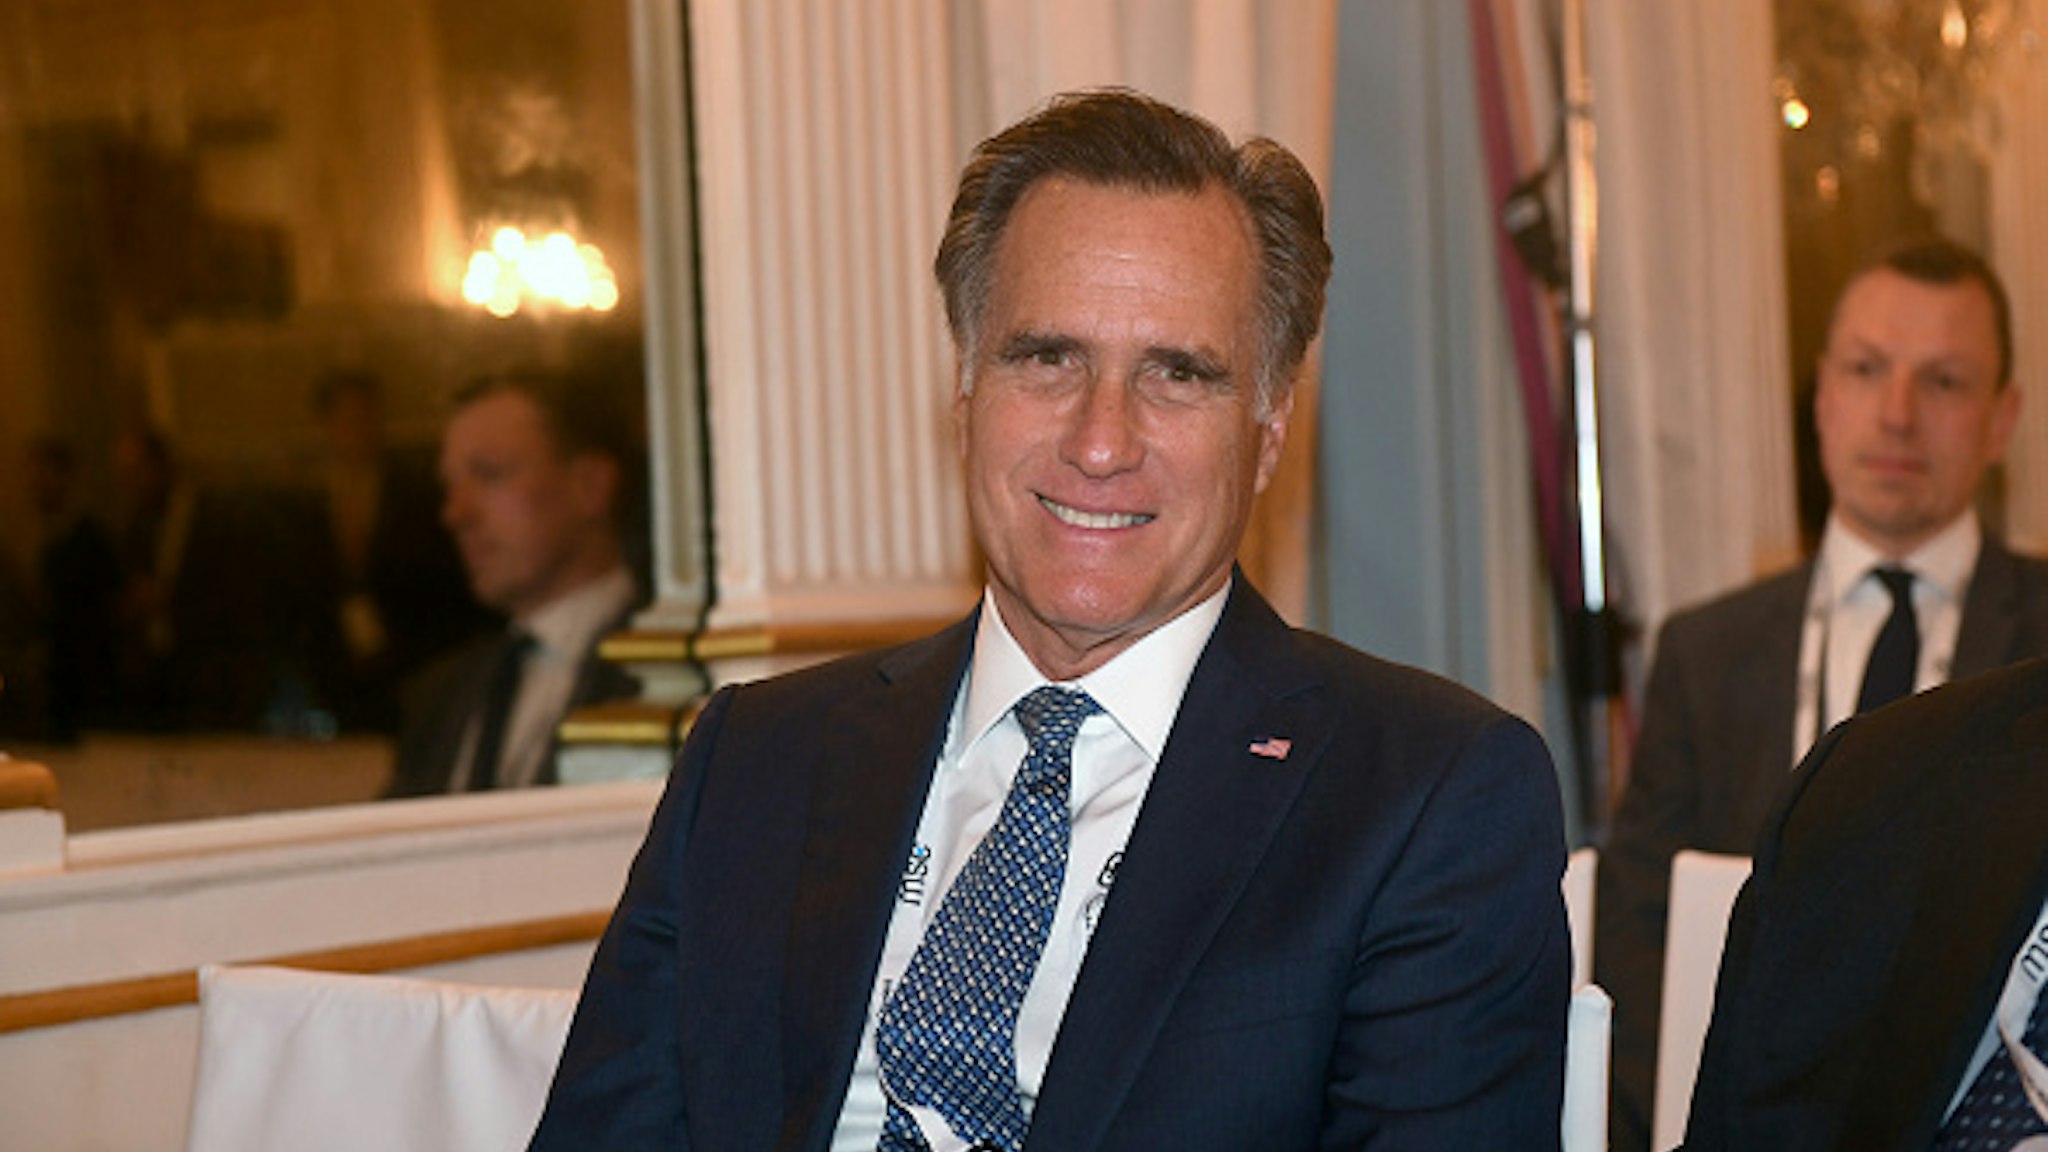 14 February 2020, Bavaria, Munich: Mitt Romney, US Senator, waits for an event to begin on the first day of the 56th Munich Security Conference.